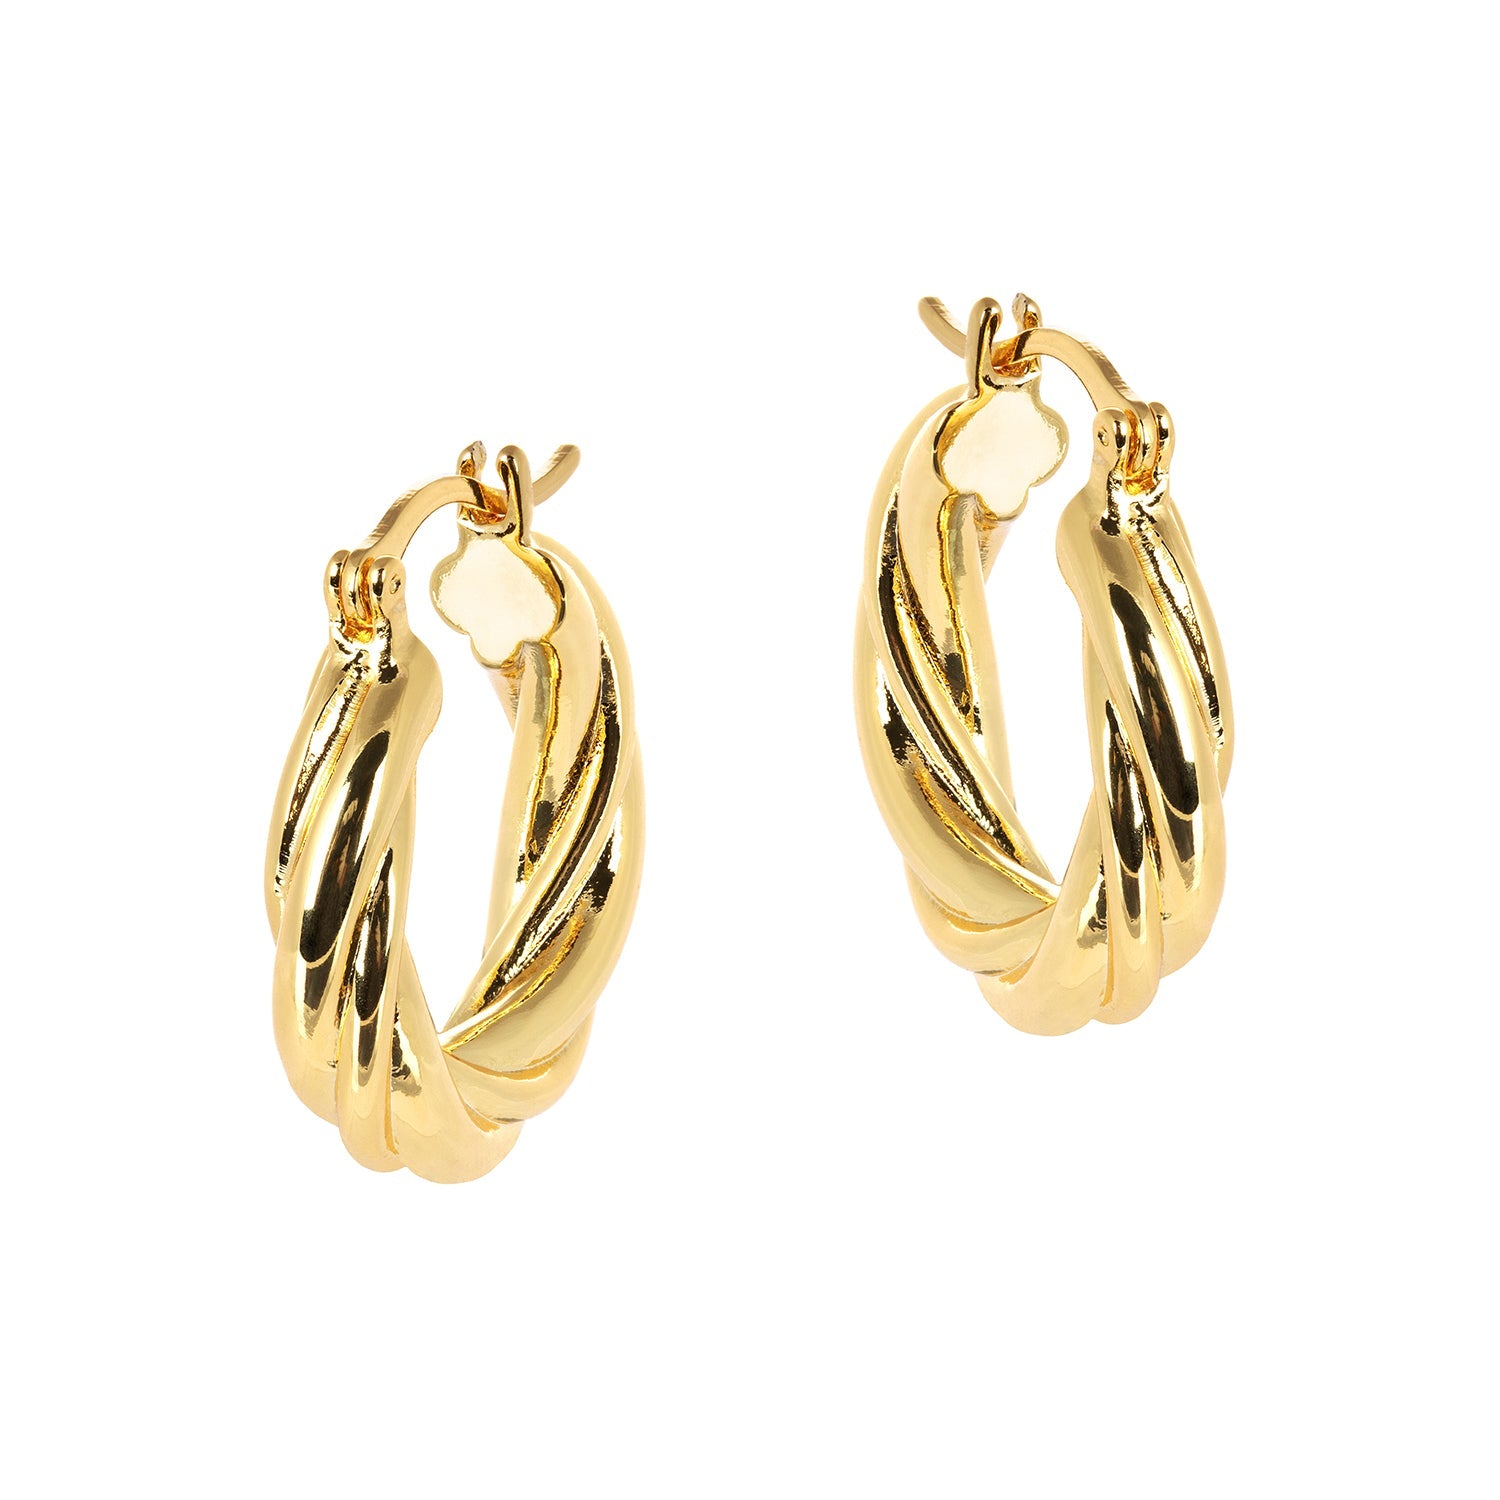 LillyThinTwistedGoldHoopEarrings1500x1500.jpg